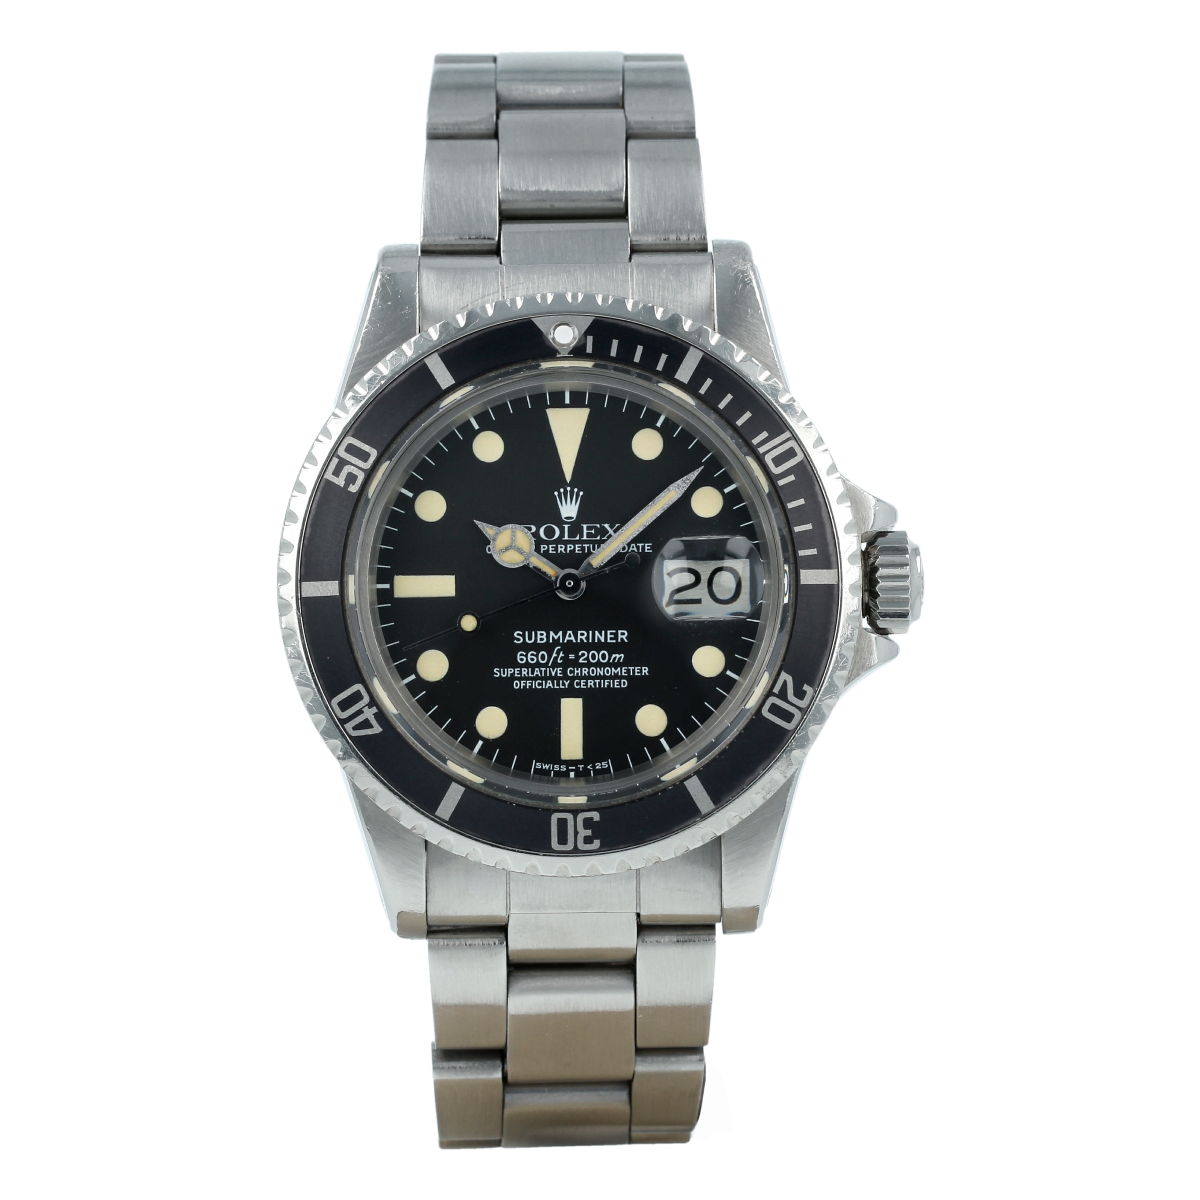 Rolex Submariner Date 1680 "White" (1978) | Buy pre-owned watch